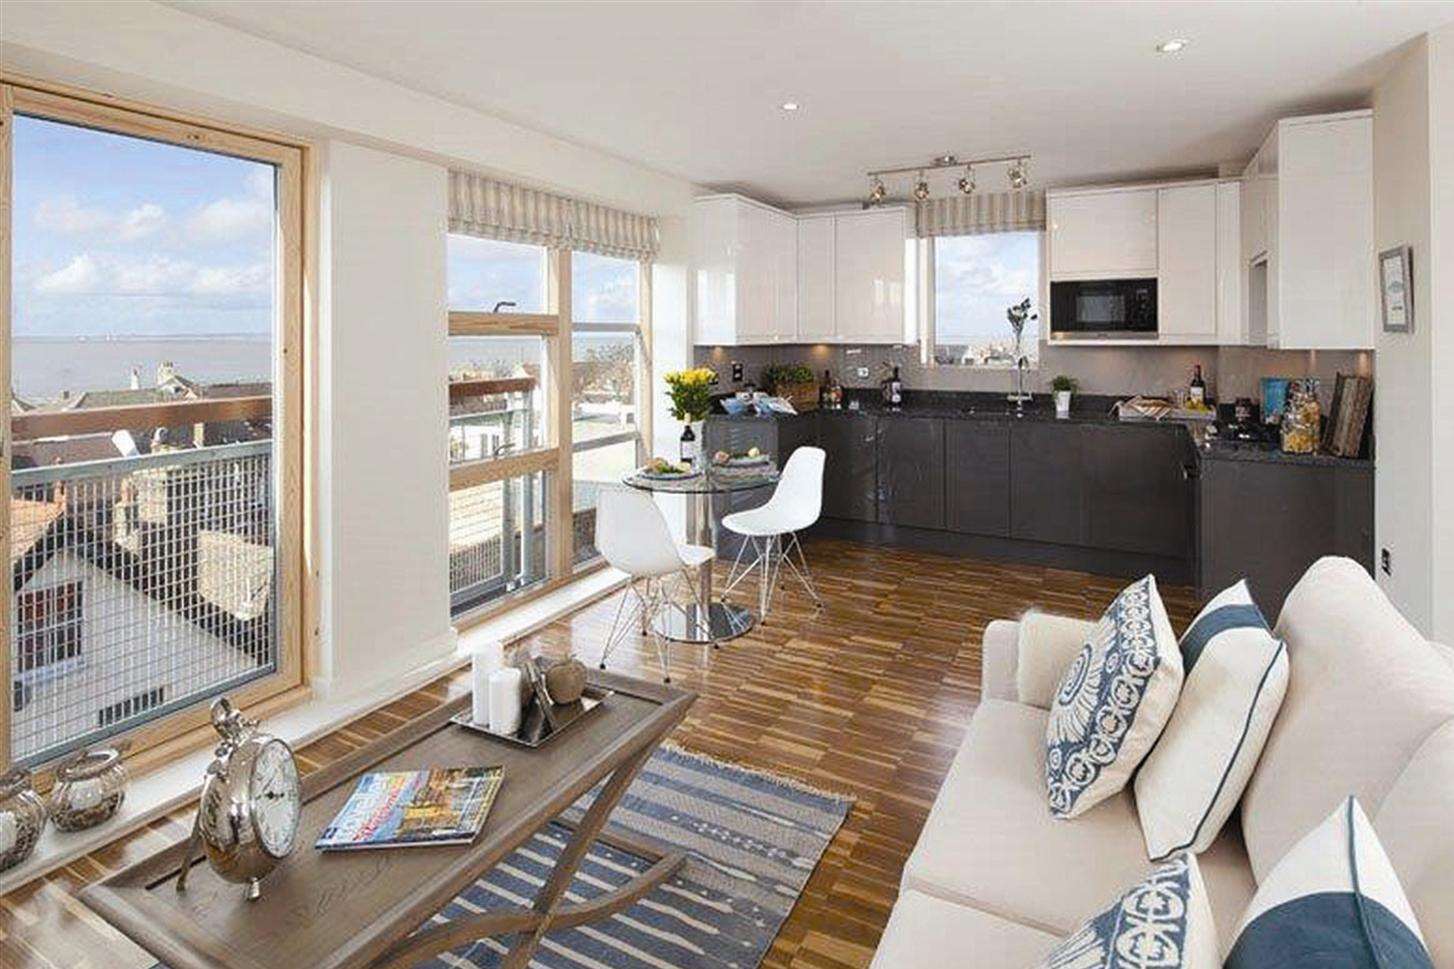 The open-plan layout at WestBay Court, Whitstable